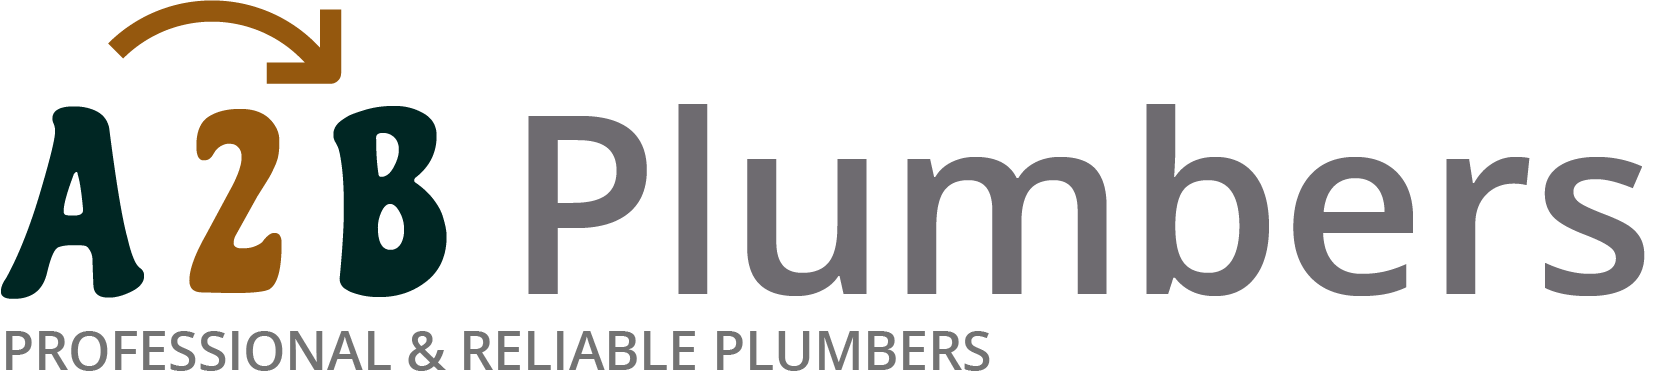 If you need a boiler installed, a radiator repaired or a leaking tap fixed, call us now - we provide services for properties in South Ruislip and the local area.